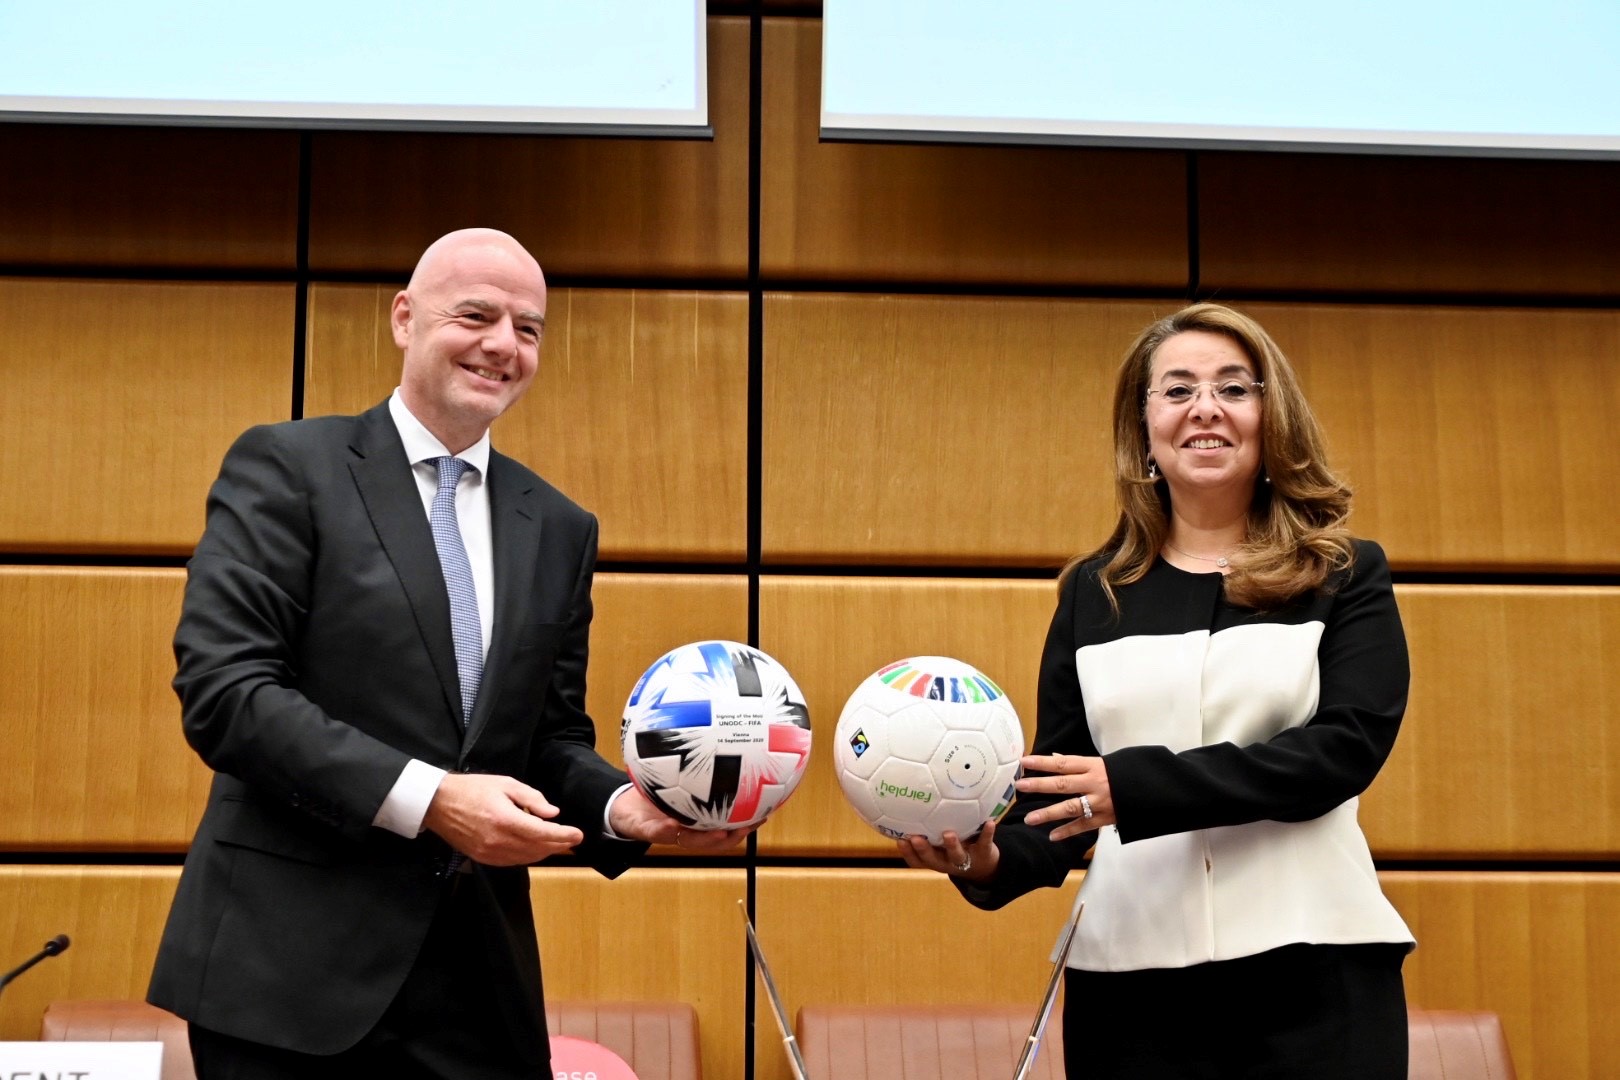 UNODC & FIFA partner to kick out corruption and foster youth development through football